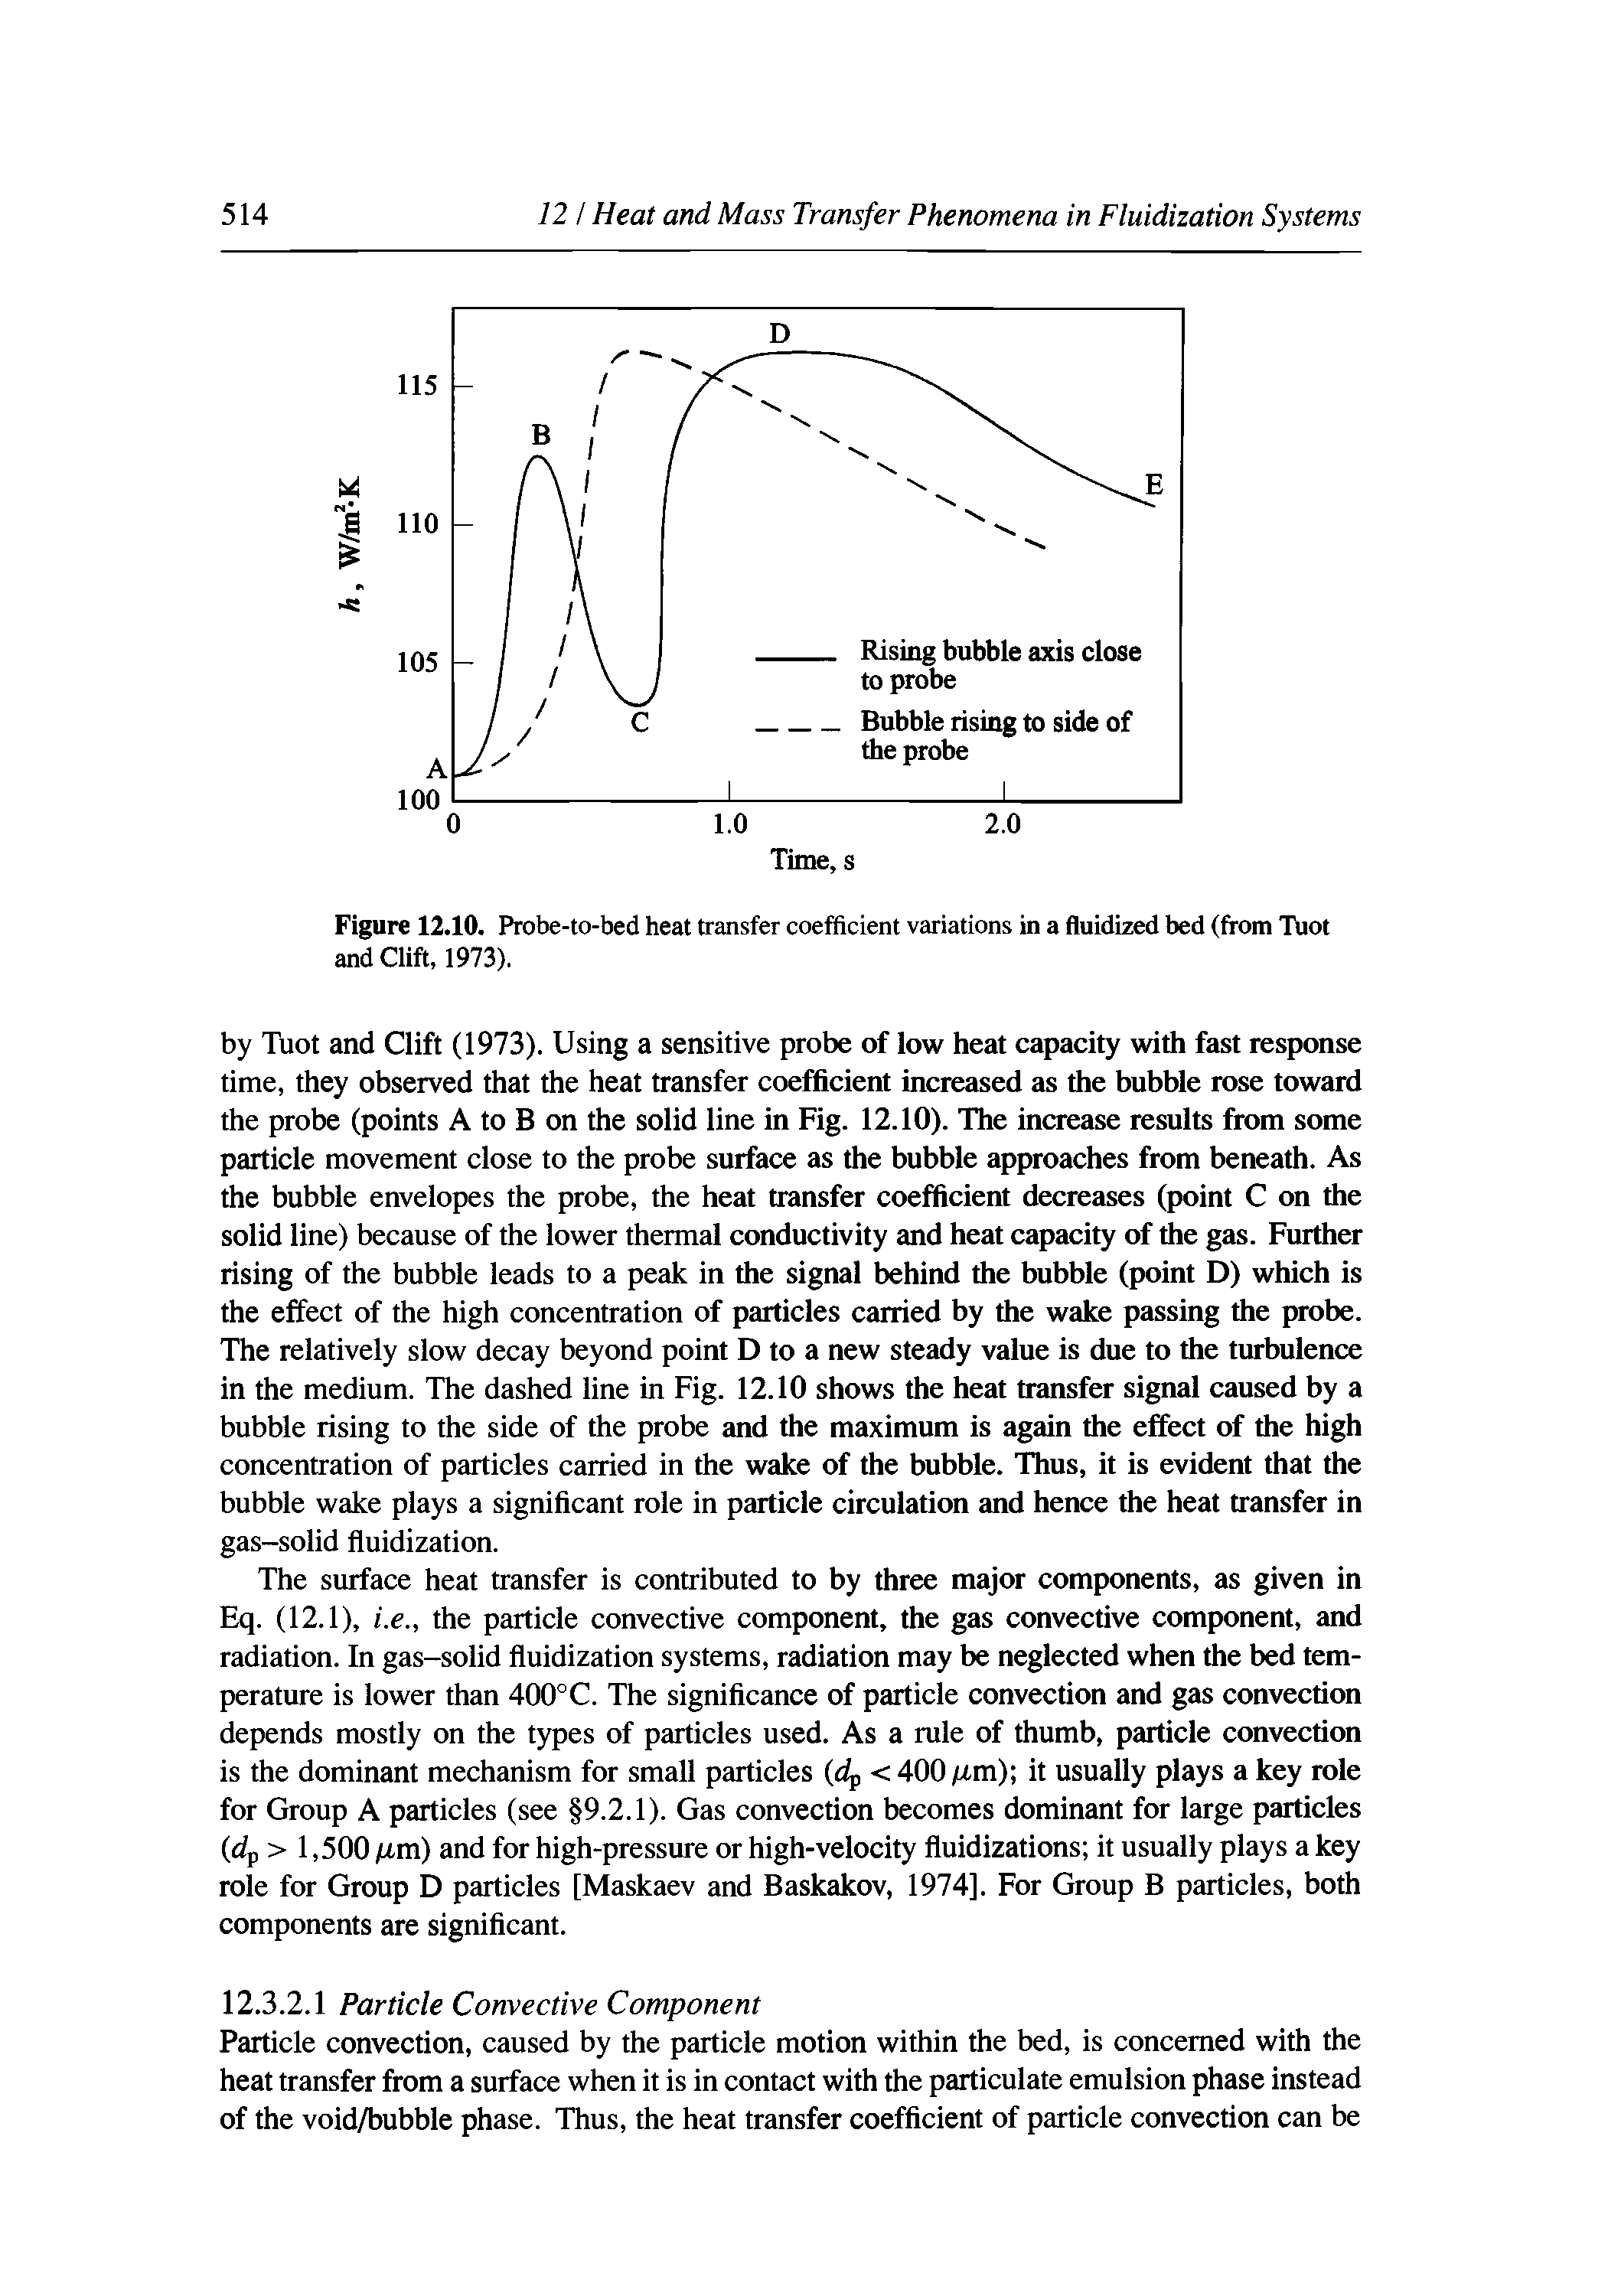 Figure 12.10. Probe-to-bed heat transfer coefficient variations in a fluidized bed (from Tuot and Clift, 1973).